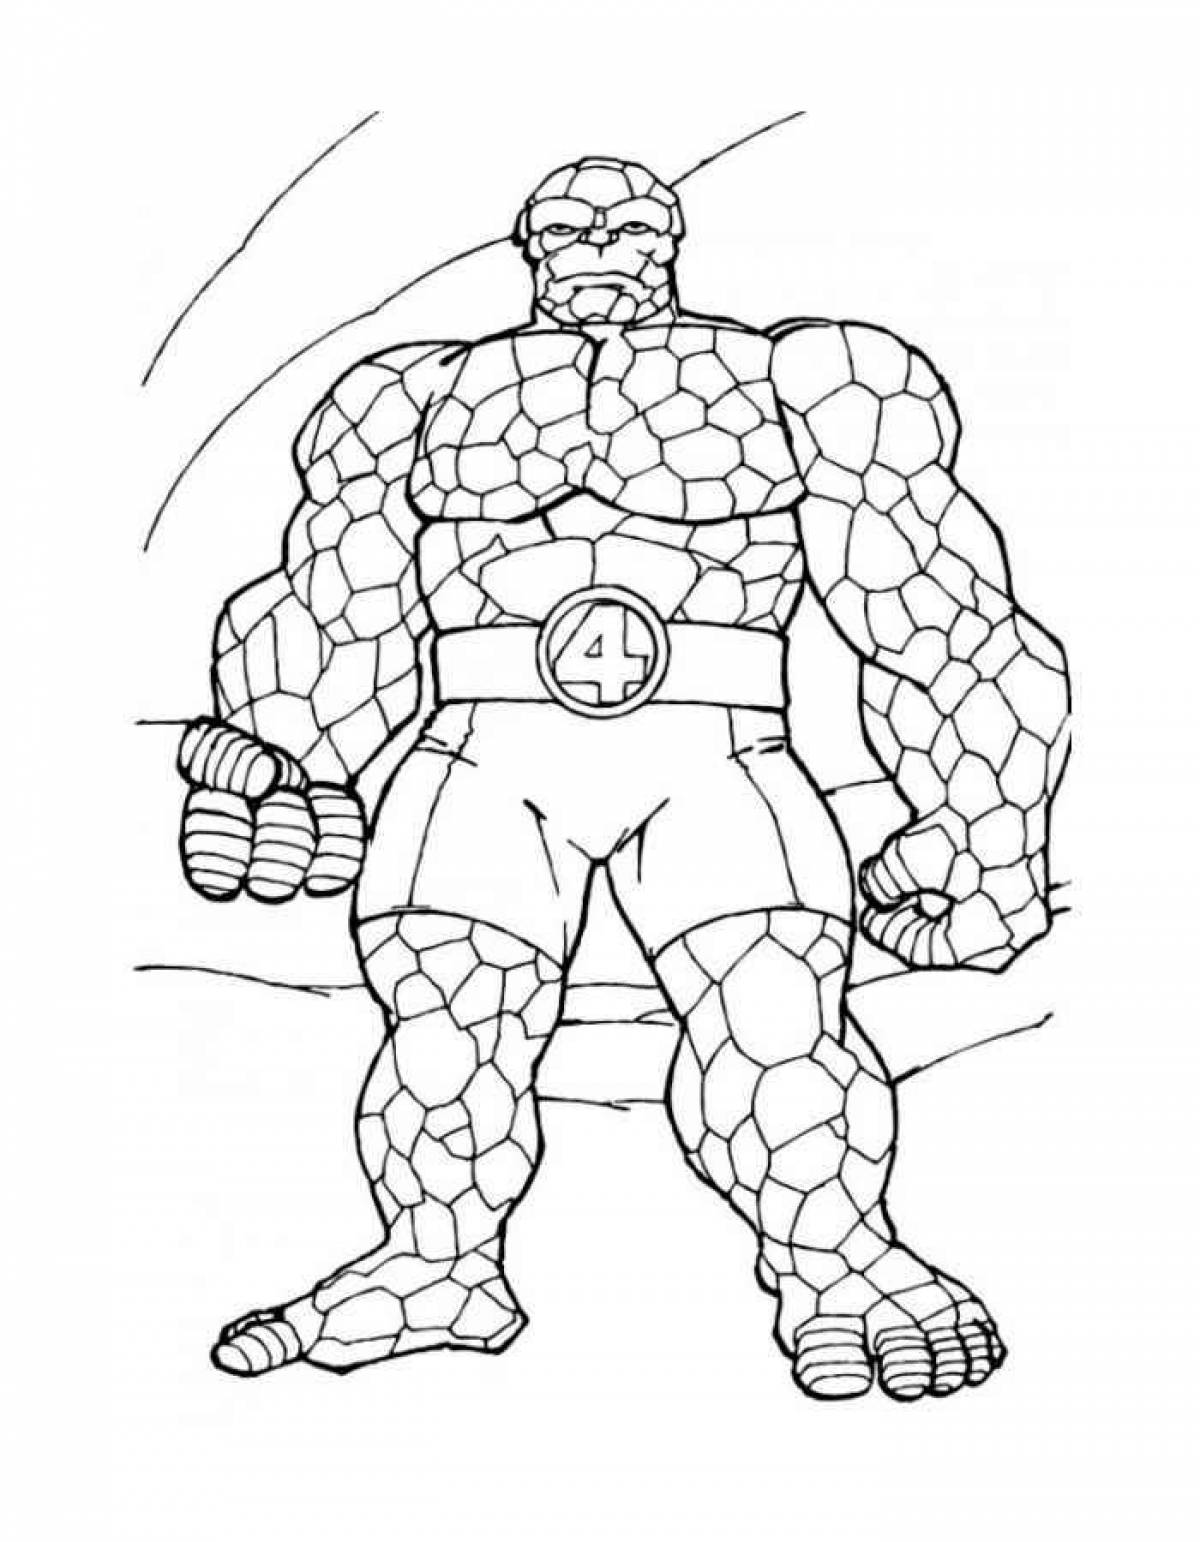 Sparkly superheroes coloring pages for kids